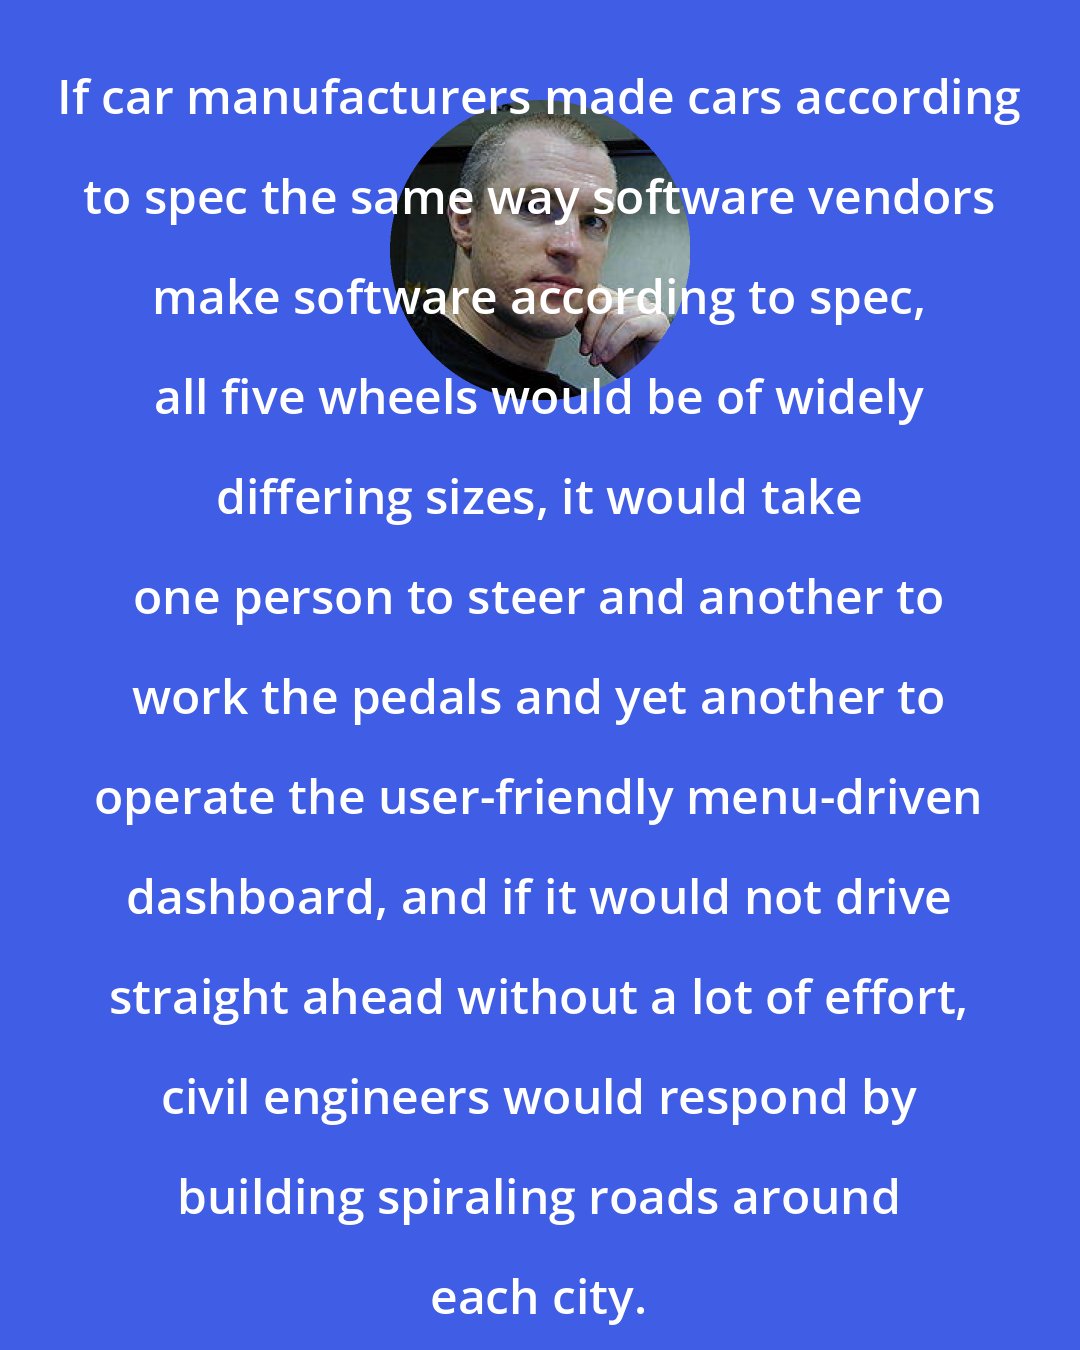 Erik Naggum: If car manufacturers made cars according to spec the same way software vendors make software according to spec, all five wheels would be of widely differing sizes, it would take one person to steer and another to work the pedals and yet another to operate the user-friendly menu-driven dashboard, and if it would not drive straight ahead without a lot of effort, civil engineers would respond by building spiraling roads around each city.